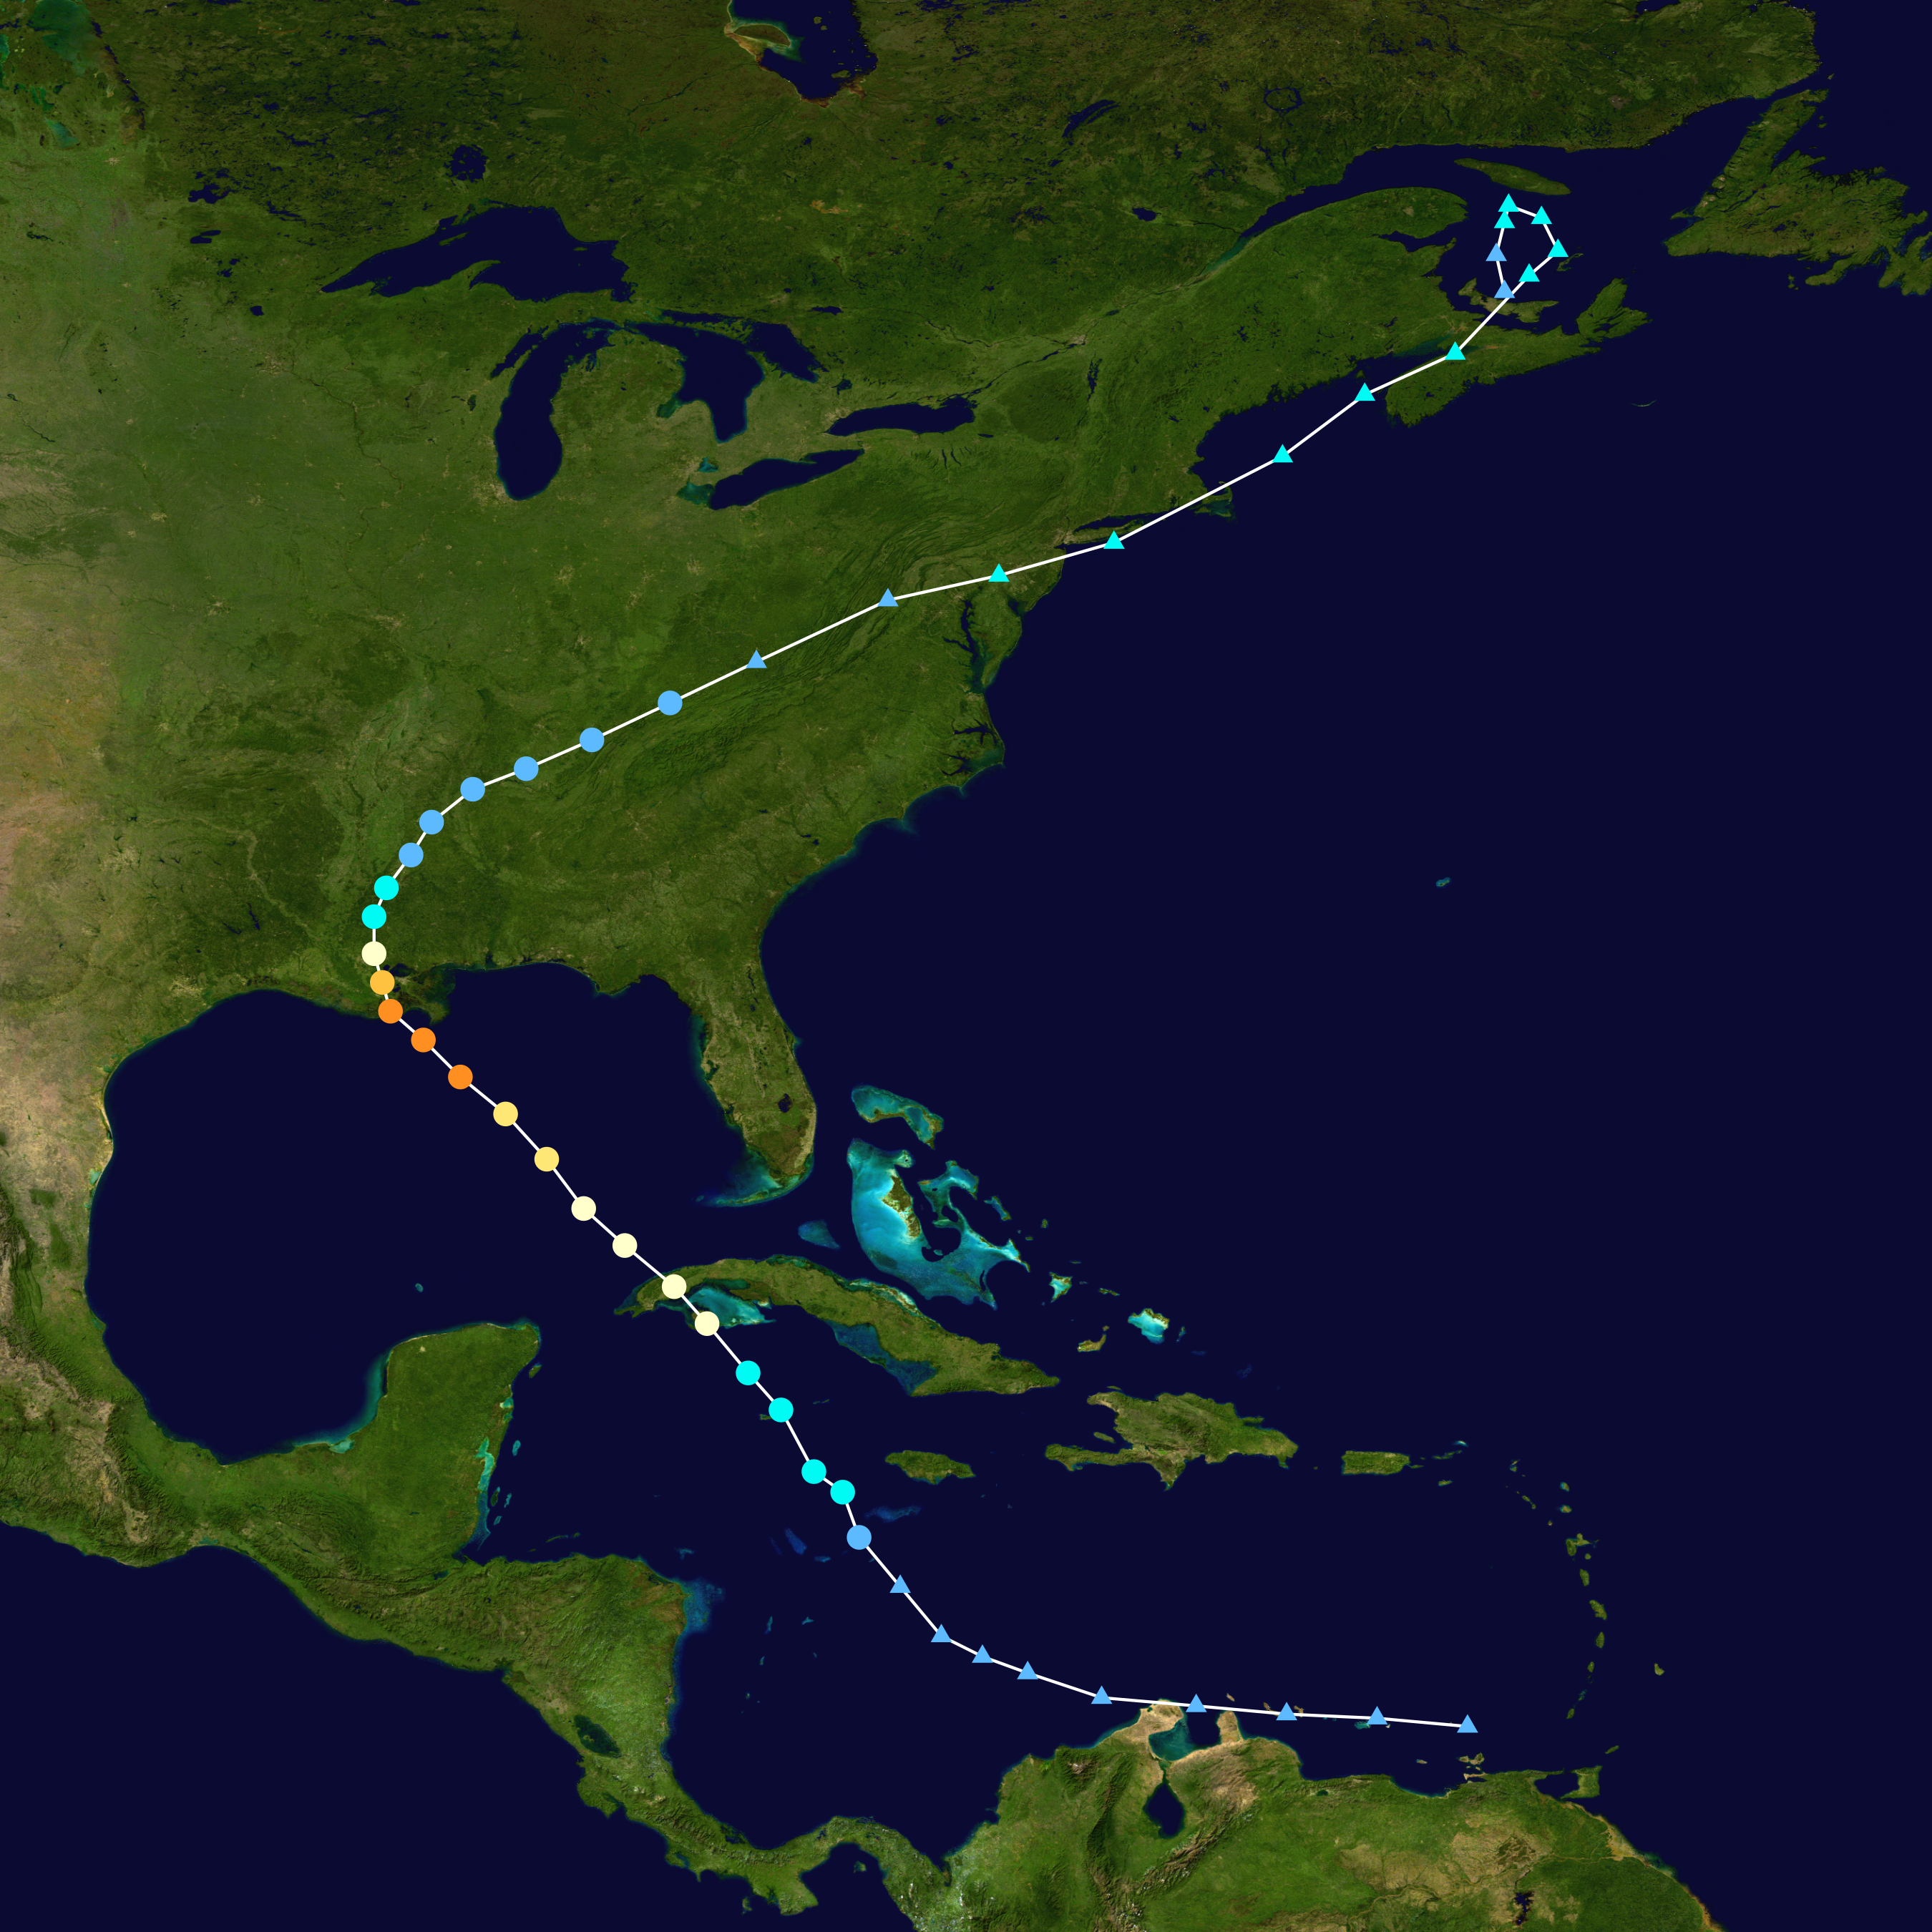 The path of Ida from the Caribbean into Atlantic Canada from August 23rd to September 4th.